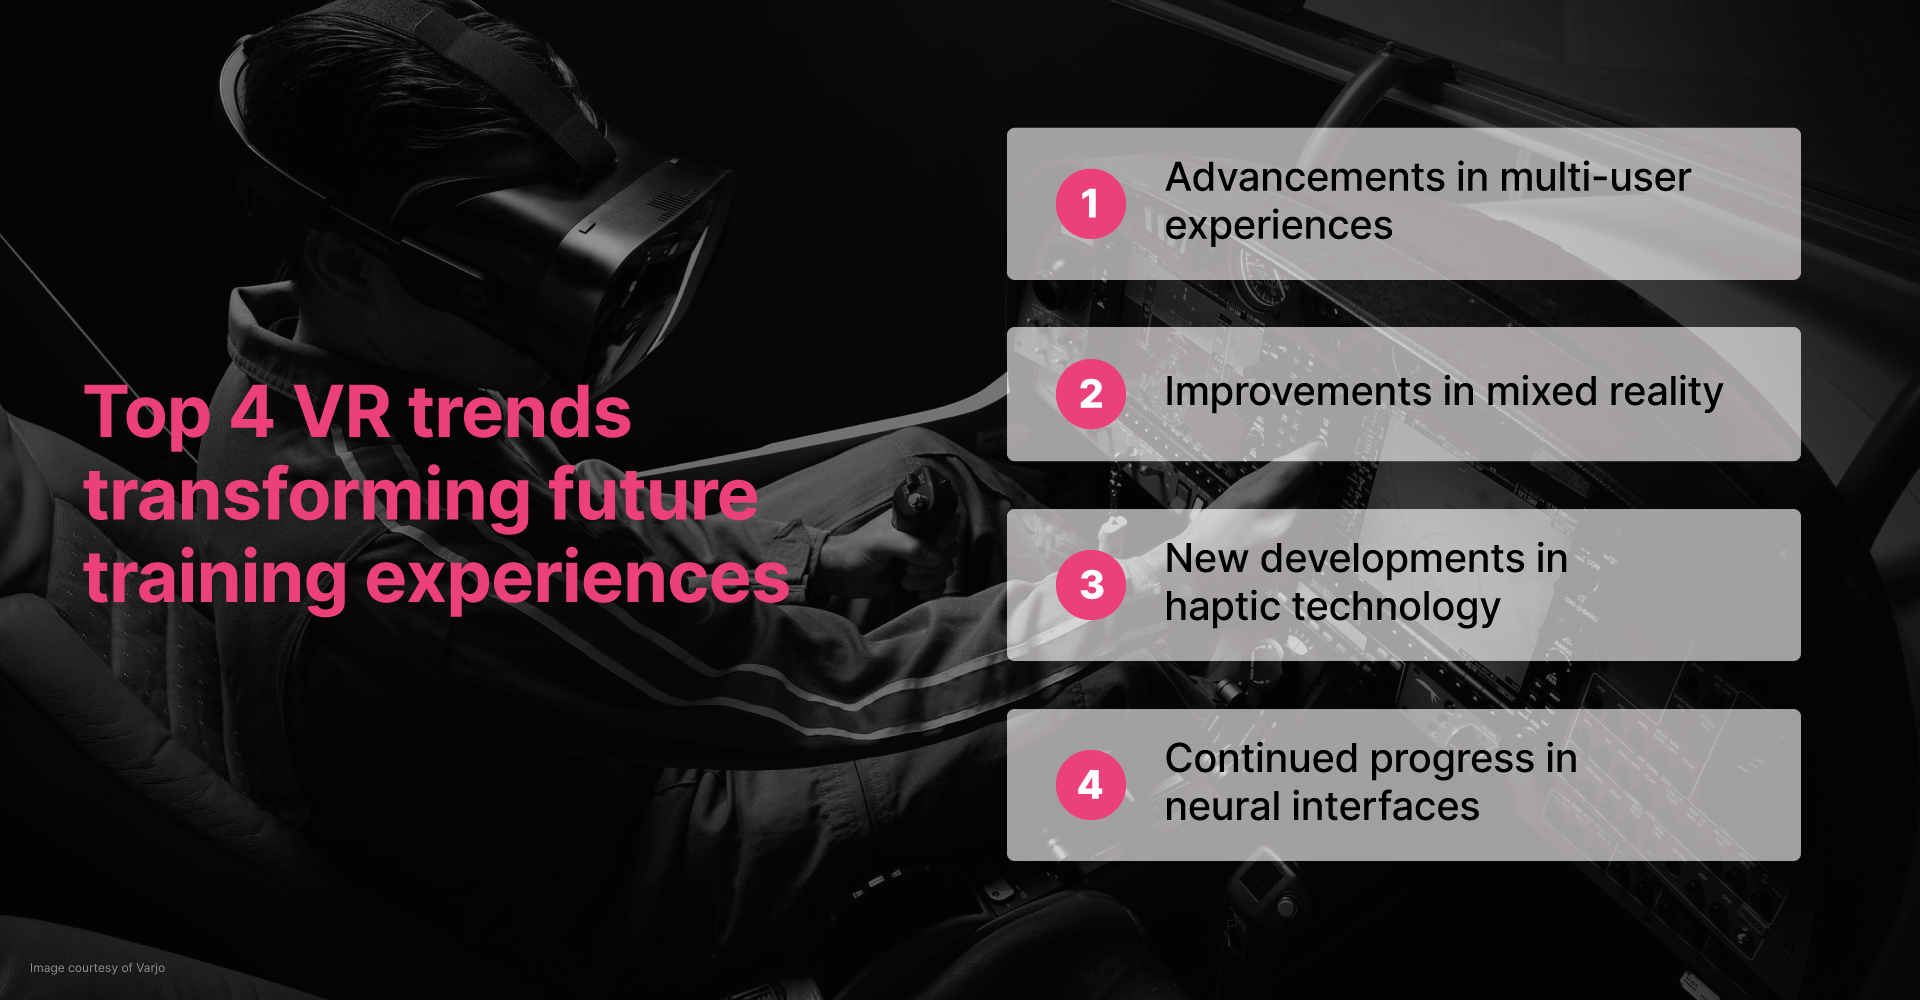 Infographic text – Top 4 VR trends transforming future training experiences: (1) Advancements in multi-user experiences, (2) Improvements in mixed reality, (3) New developments in haptic technology, and (4) Continued progress in neural interfaces.